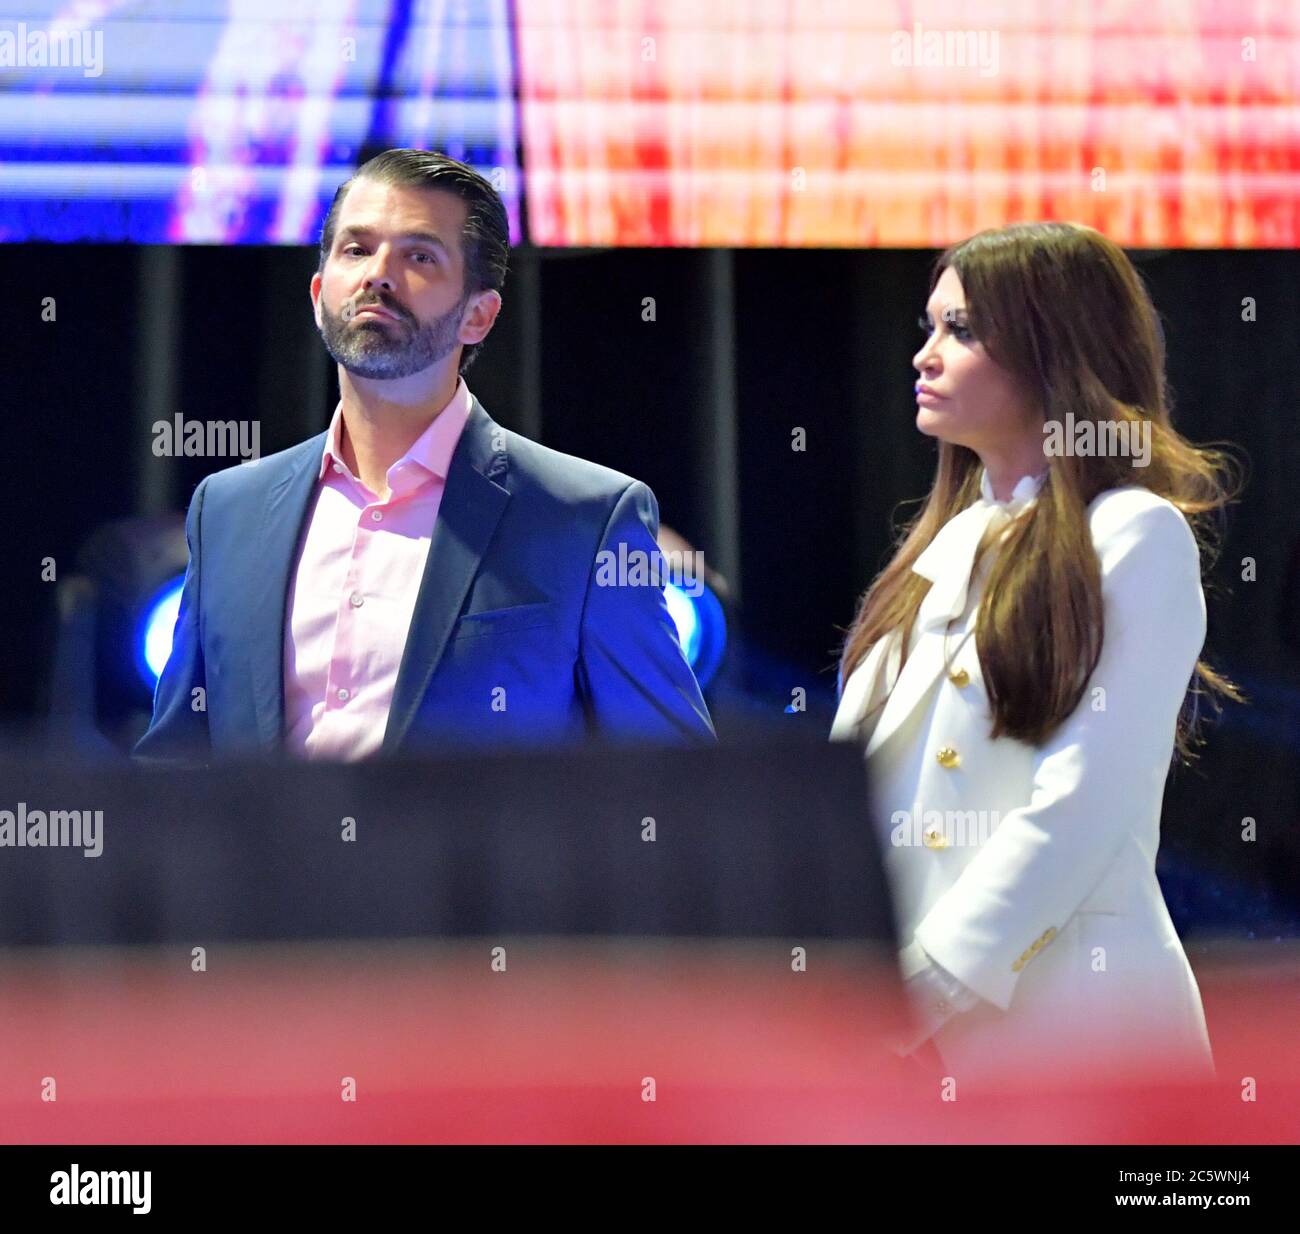 West PALM BEACH, Florida - 21 DICEMBRE: Donald Trump Jr, Kimberly Guilfoyle al Turning Point USA Student Action Summit del 2019 - giorno 3 al Palm Beach County Convention Center il 21 dicembre 2019 a West Palm Beach, Florida. People: Donald Trump Jr, Kimberly Guilfoyle Credit: Storms Media Group/Alamy Live News Foto Stock